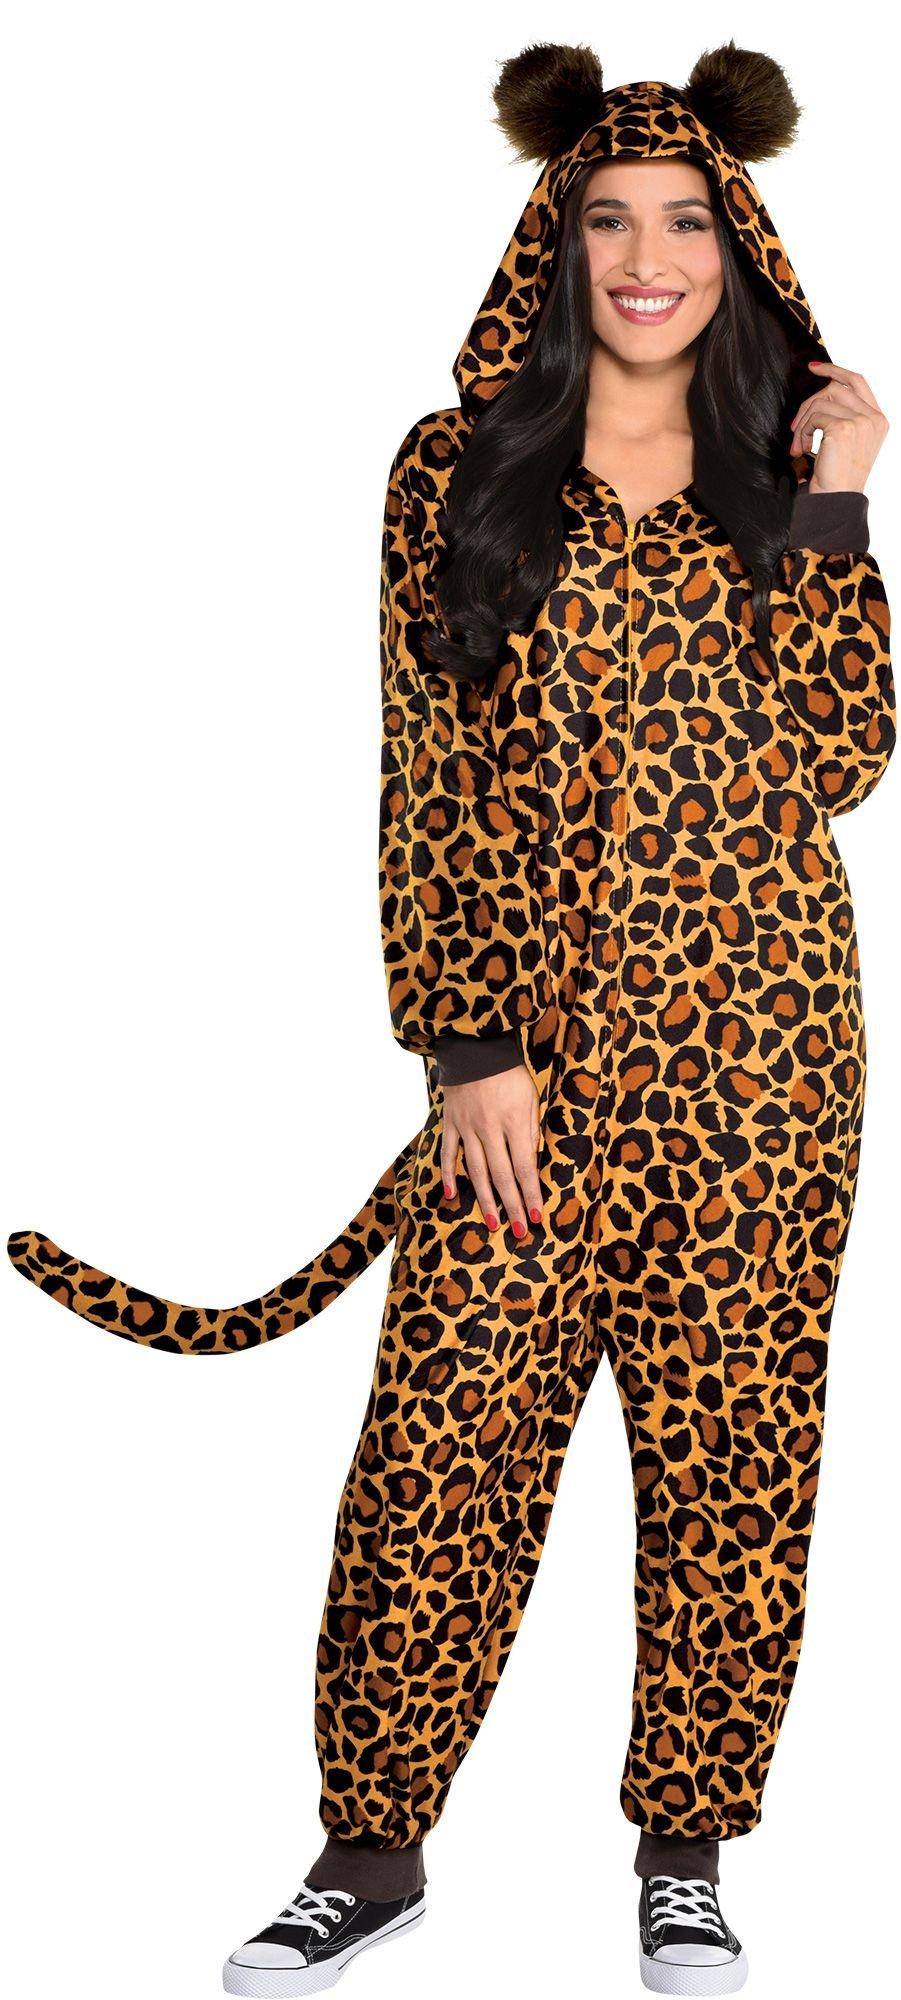 Adult Zipster Leopard Print One-Piece Costume | Party City